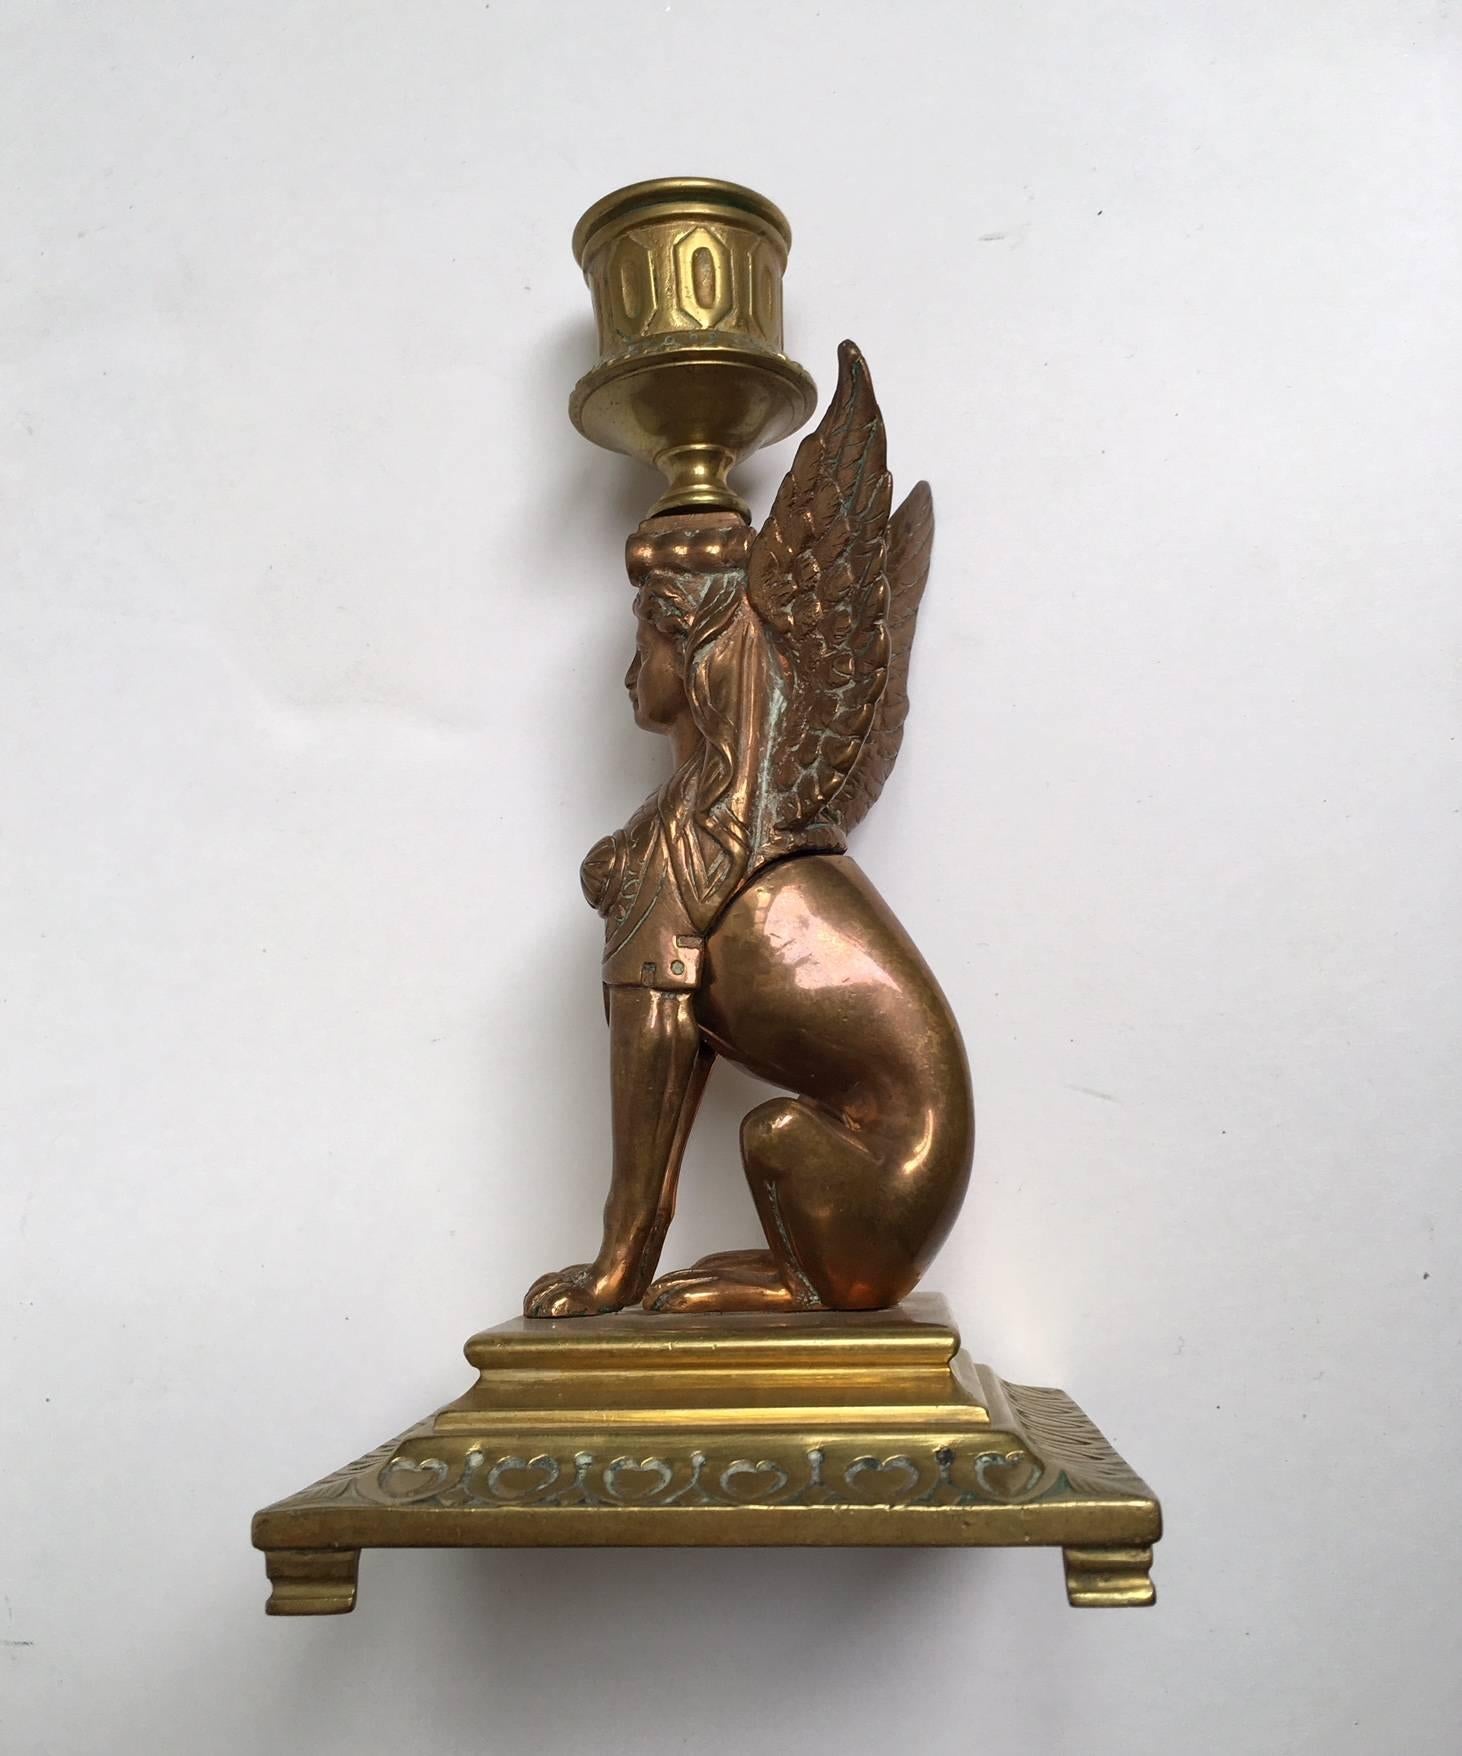 A pair of French Empire period pair of candleholder ,representing two sphinx ,in gilt and gilt coppered plate on bronze.
From an early cast of Ferdinand Barbedienne (1810_1892),edited lately in the 19th century ,when his nephew took over the firm